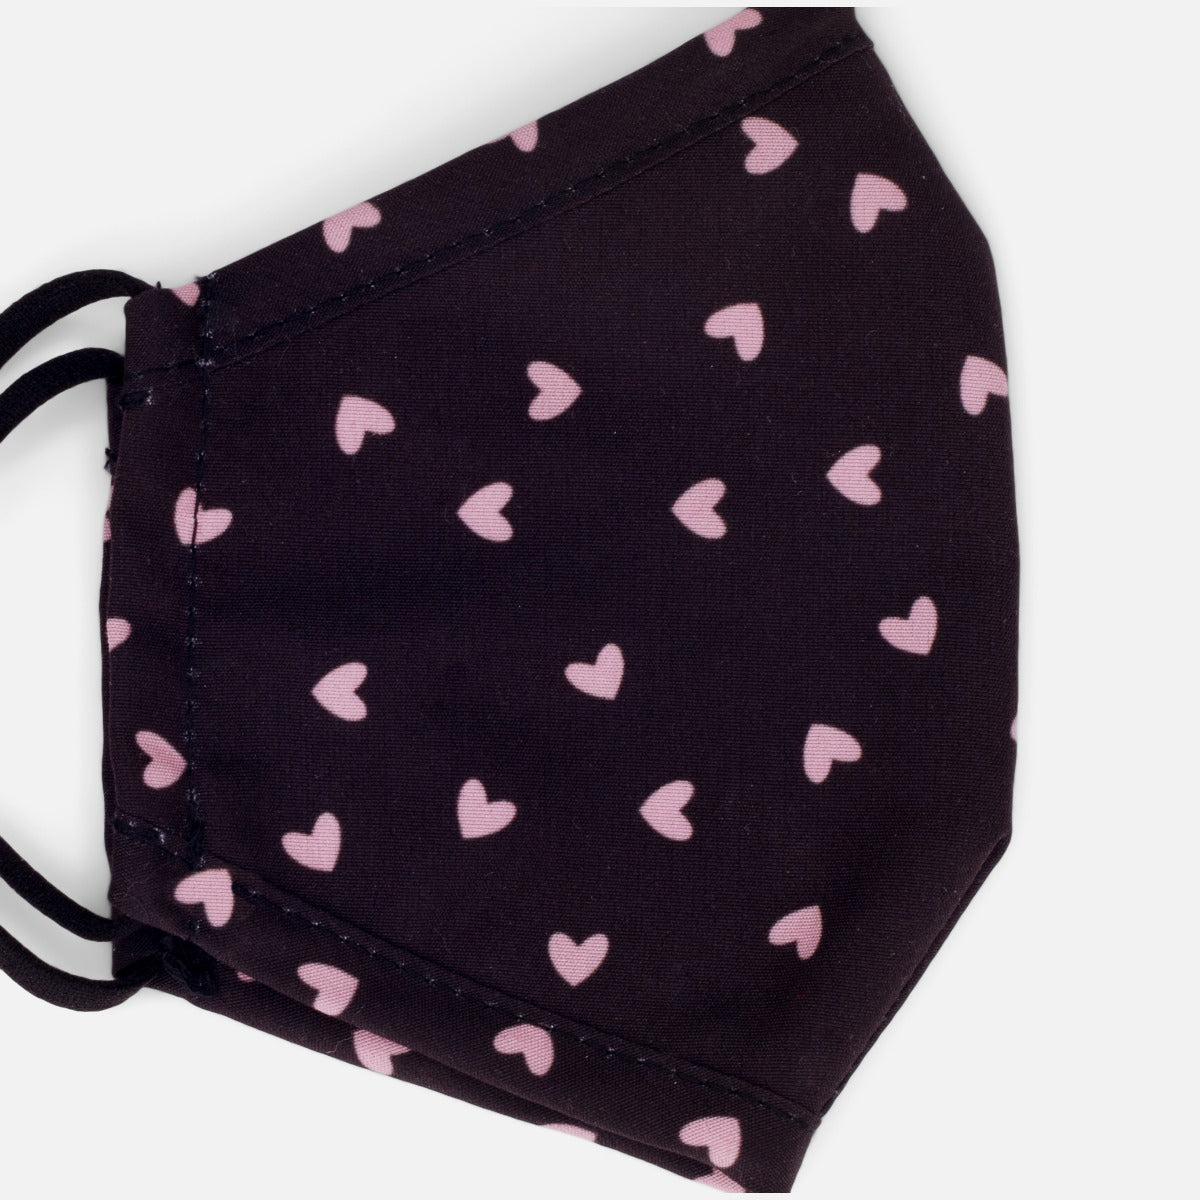 Reusable black mask with small pink hearts print for kids